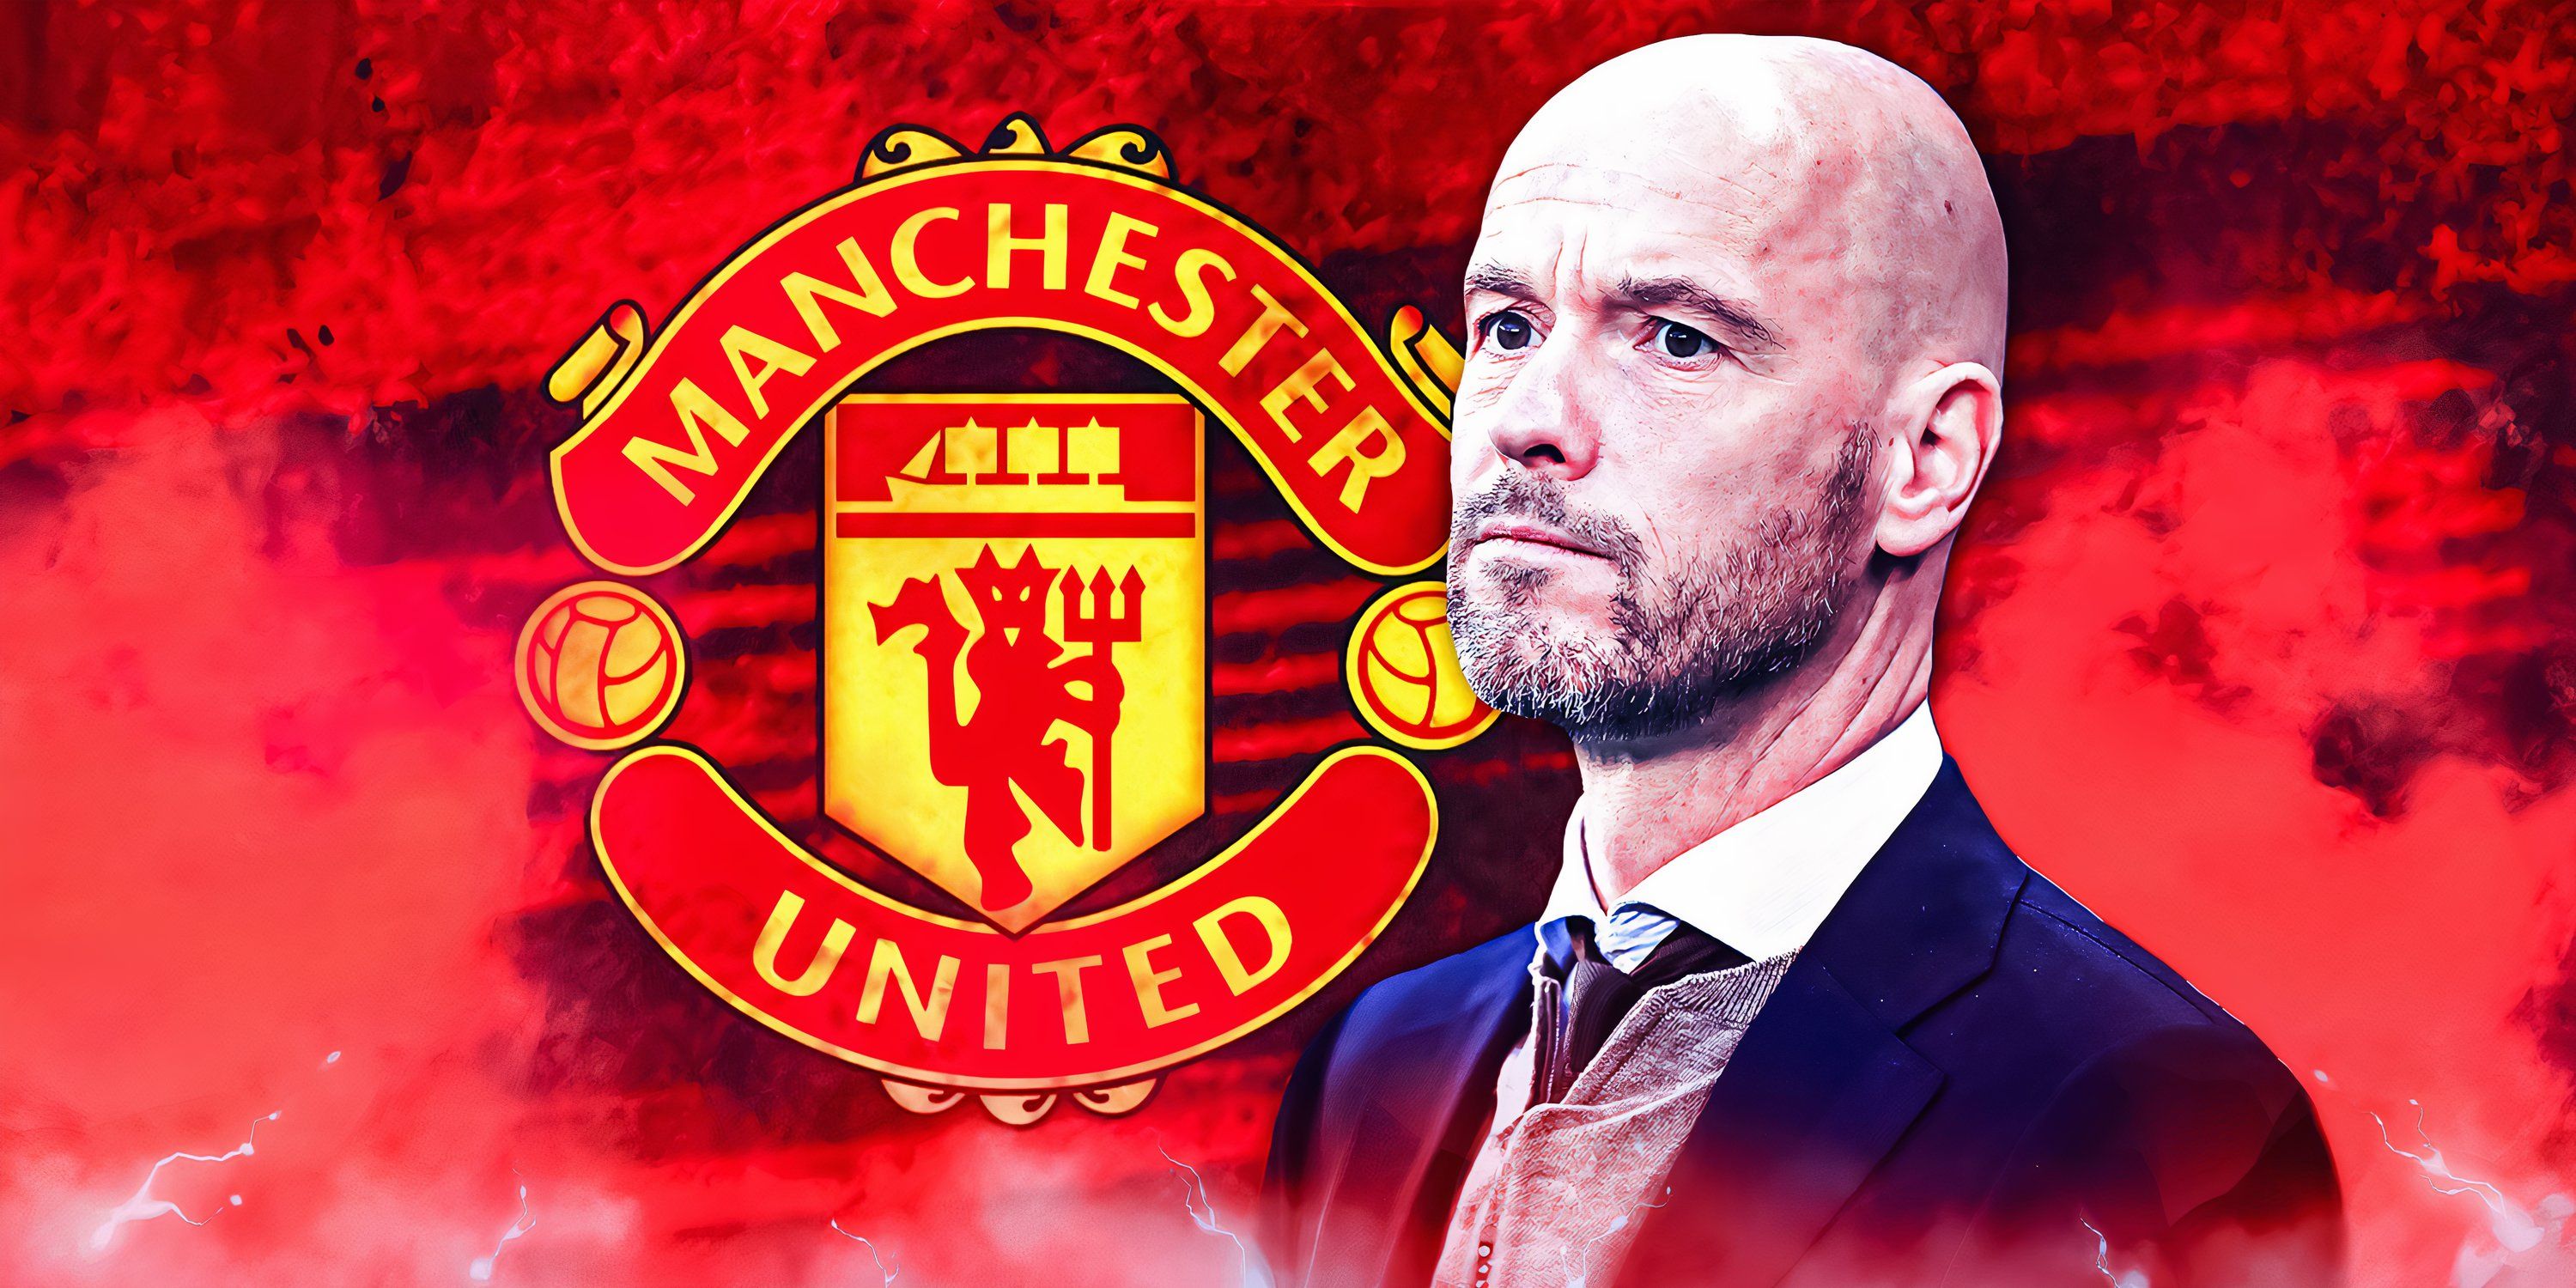 Manchester United boss Erik ten Hag and the Red Devils' badge